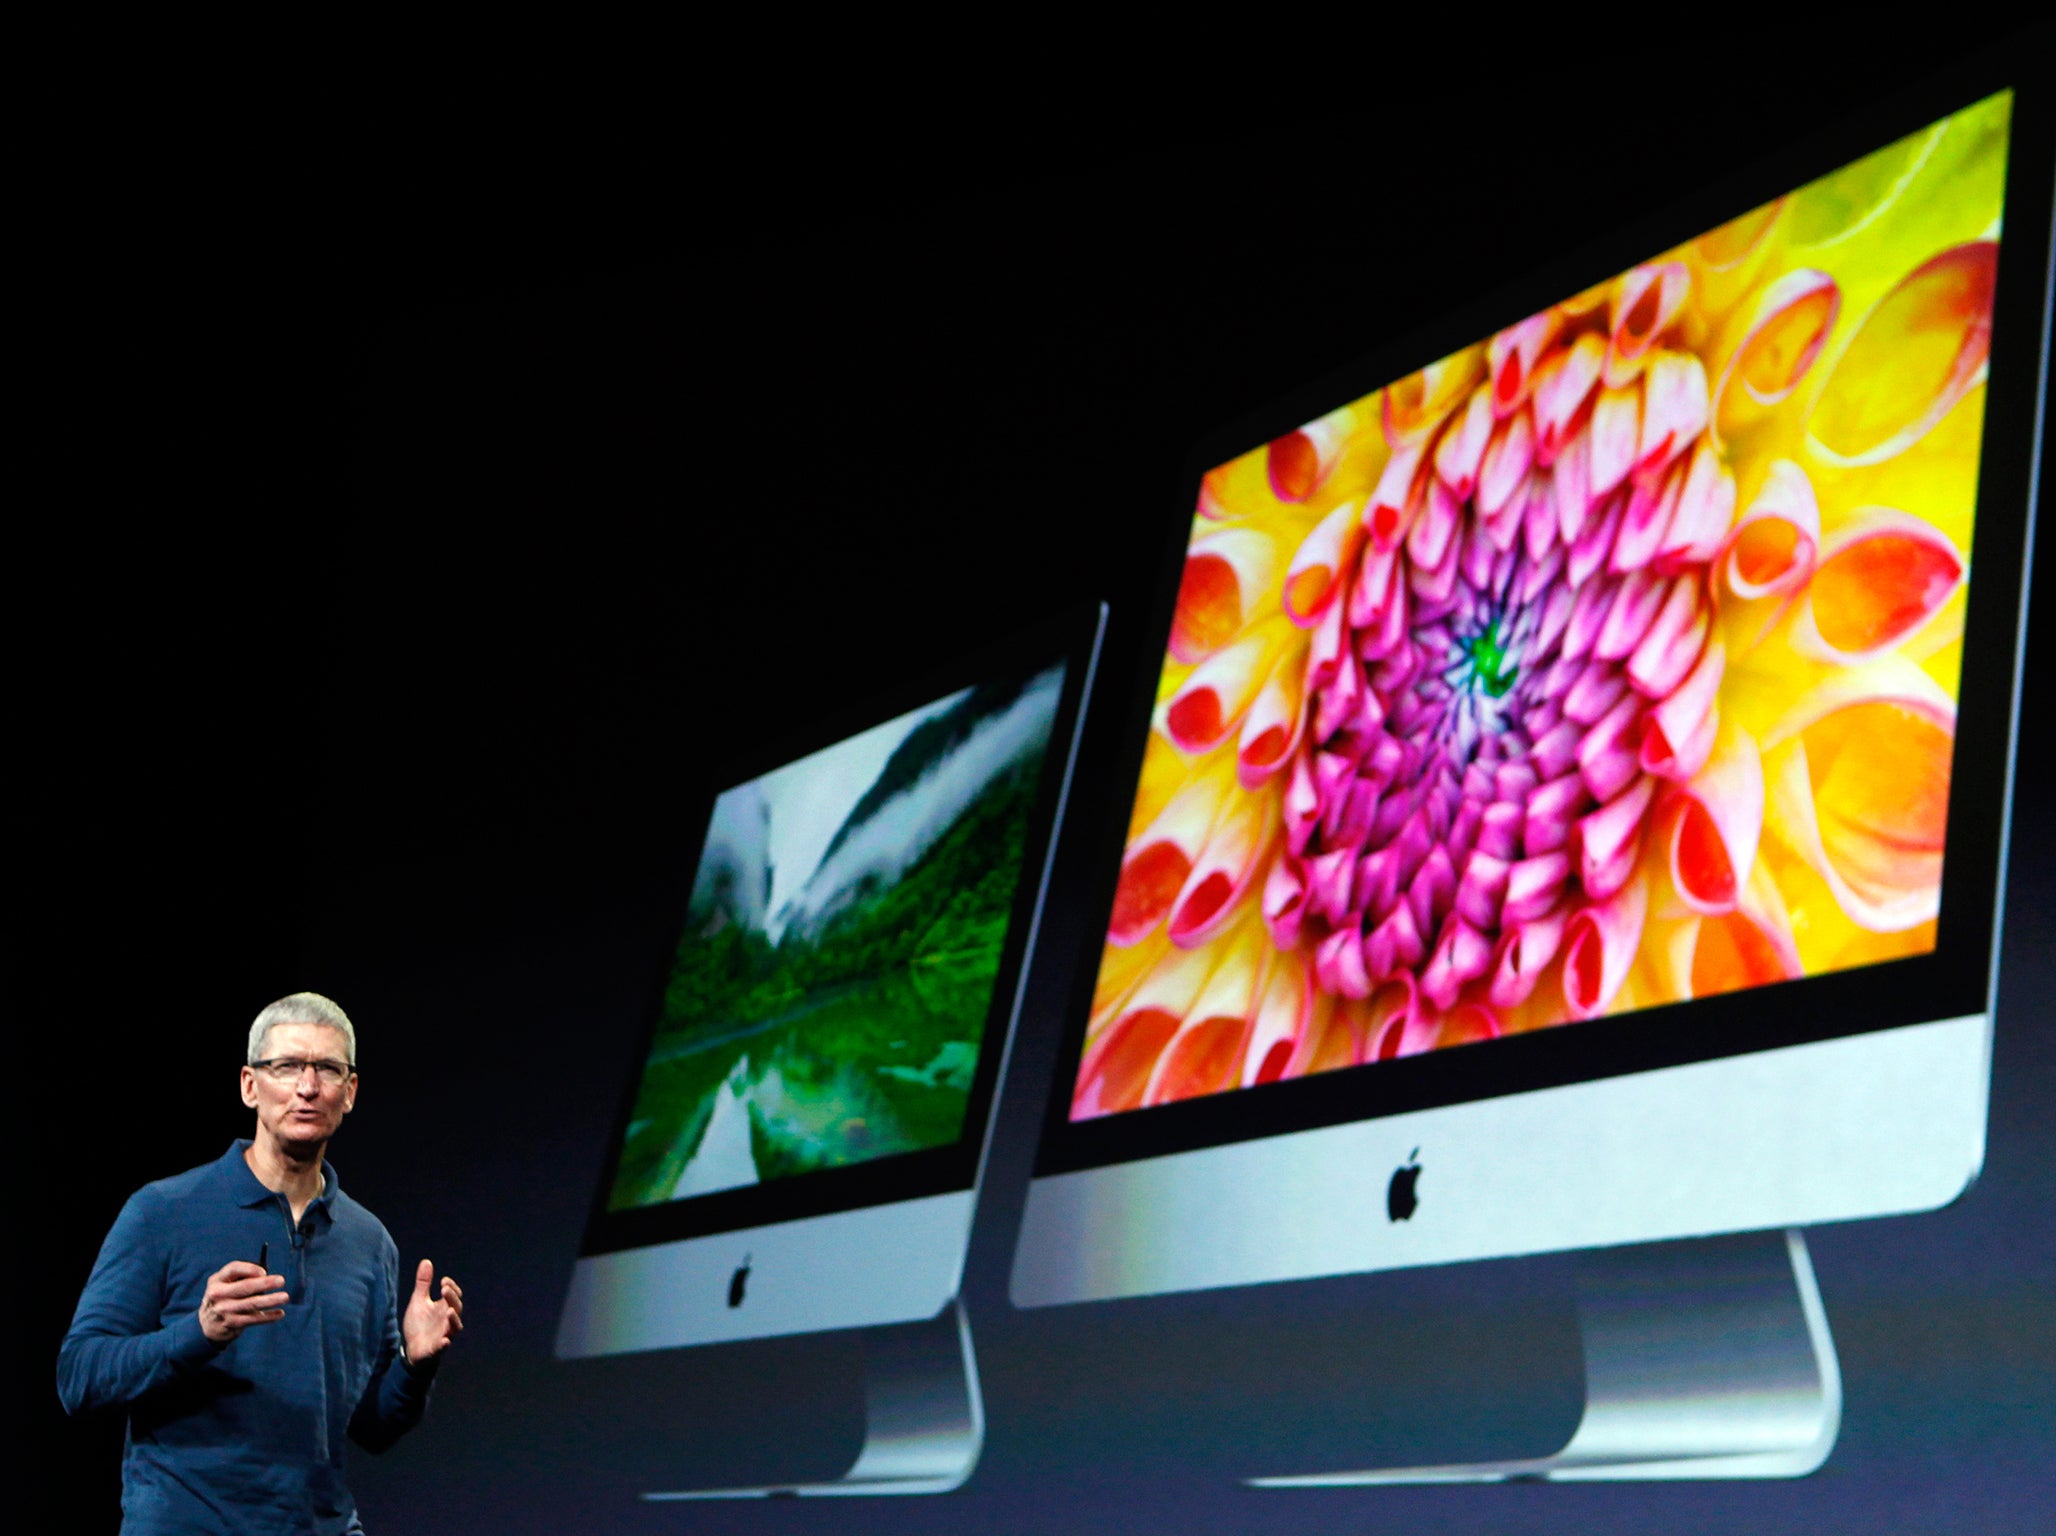 2012Apple CEO Tim Cook describes new models of the iMac desktop computers during an Apple event in San Jose, California October 23, 2012